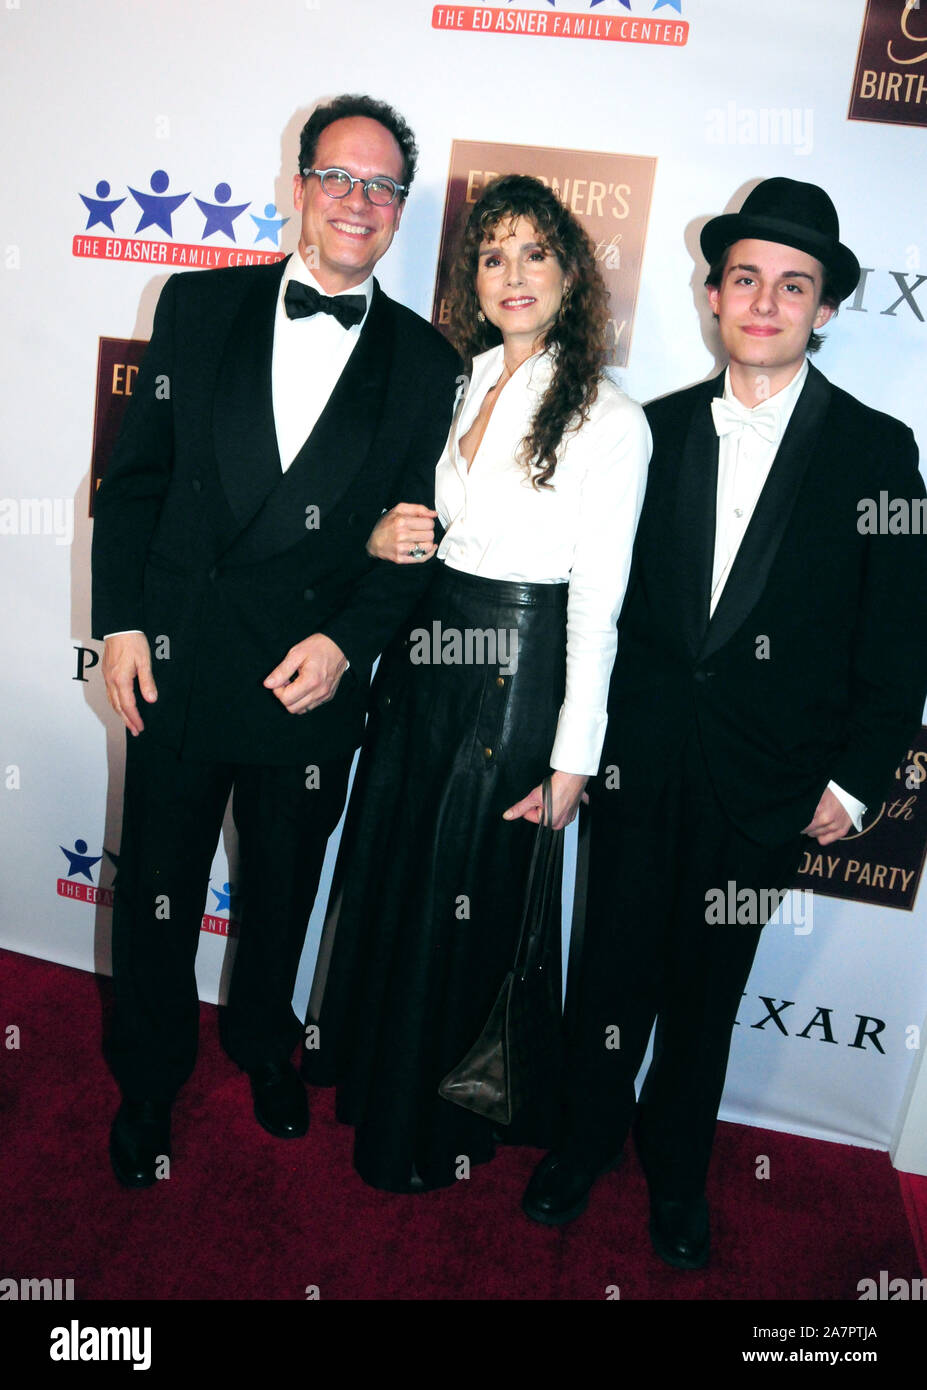 Hollywood, California, USA 3rd November 2019 Actor Diedrich Bader, wife Dulcy Rogers and son Sebastian Bader attend Ed Asner's 90th Birthday Party and Roast on November 3, 2019 at Hollywood Roosevelt Hotel in Hollywood, California, USA. Photo by Barry King/Alamy Live News Stock Photo